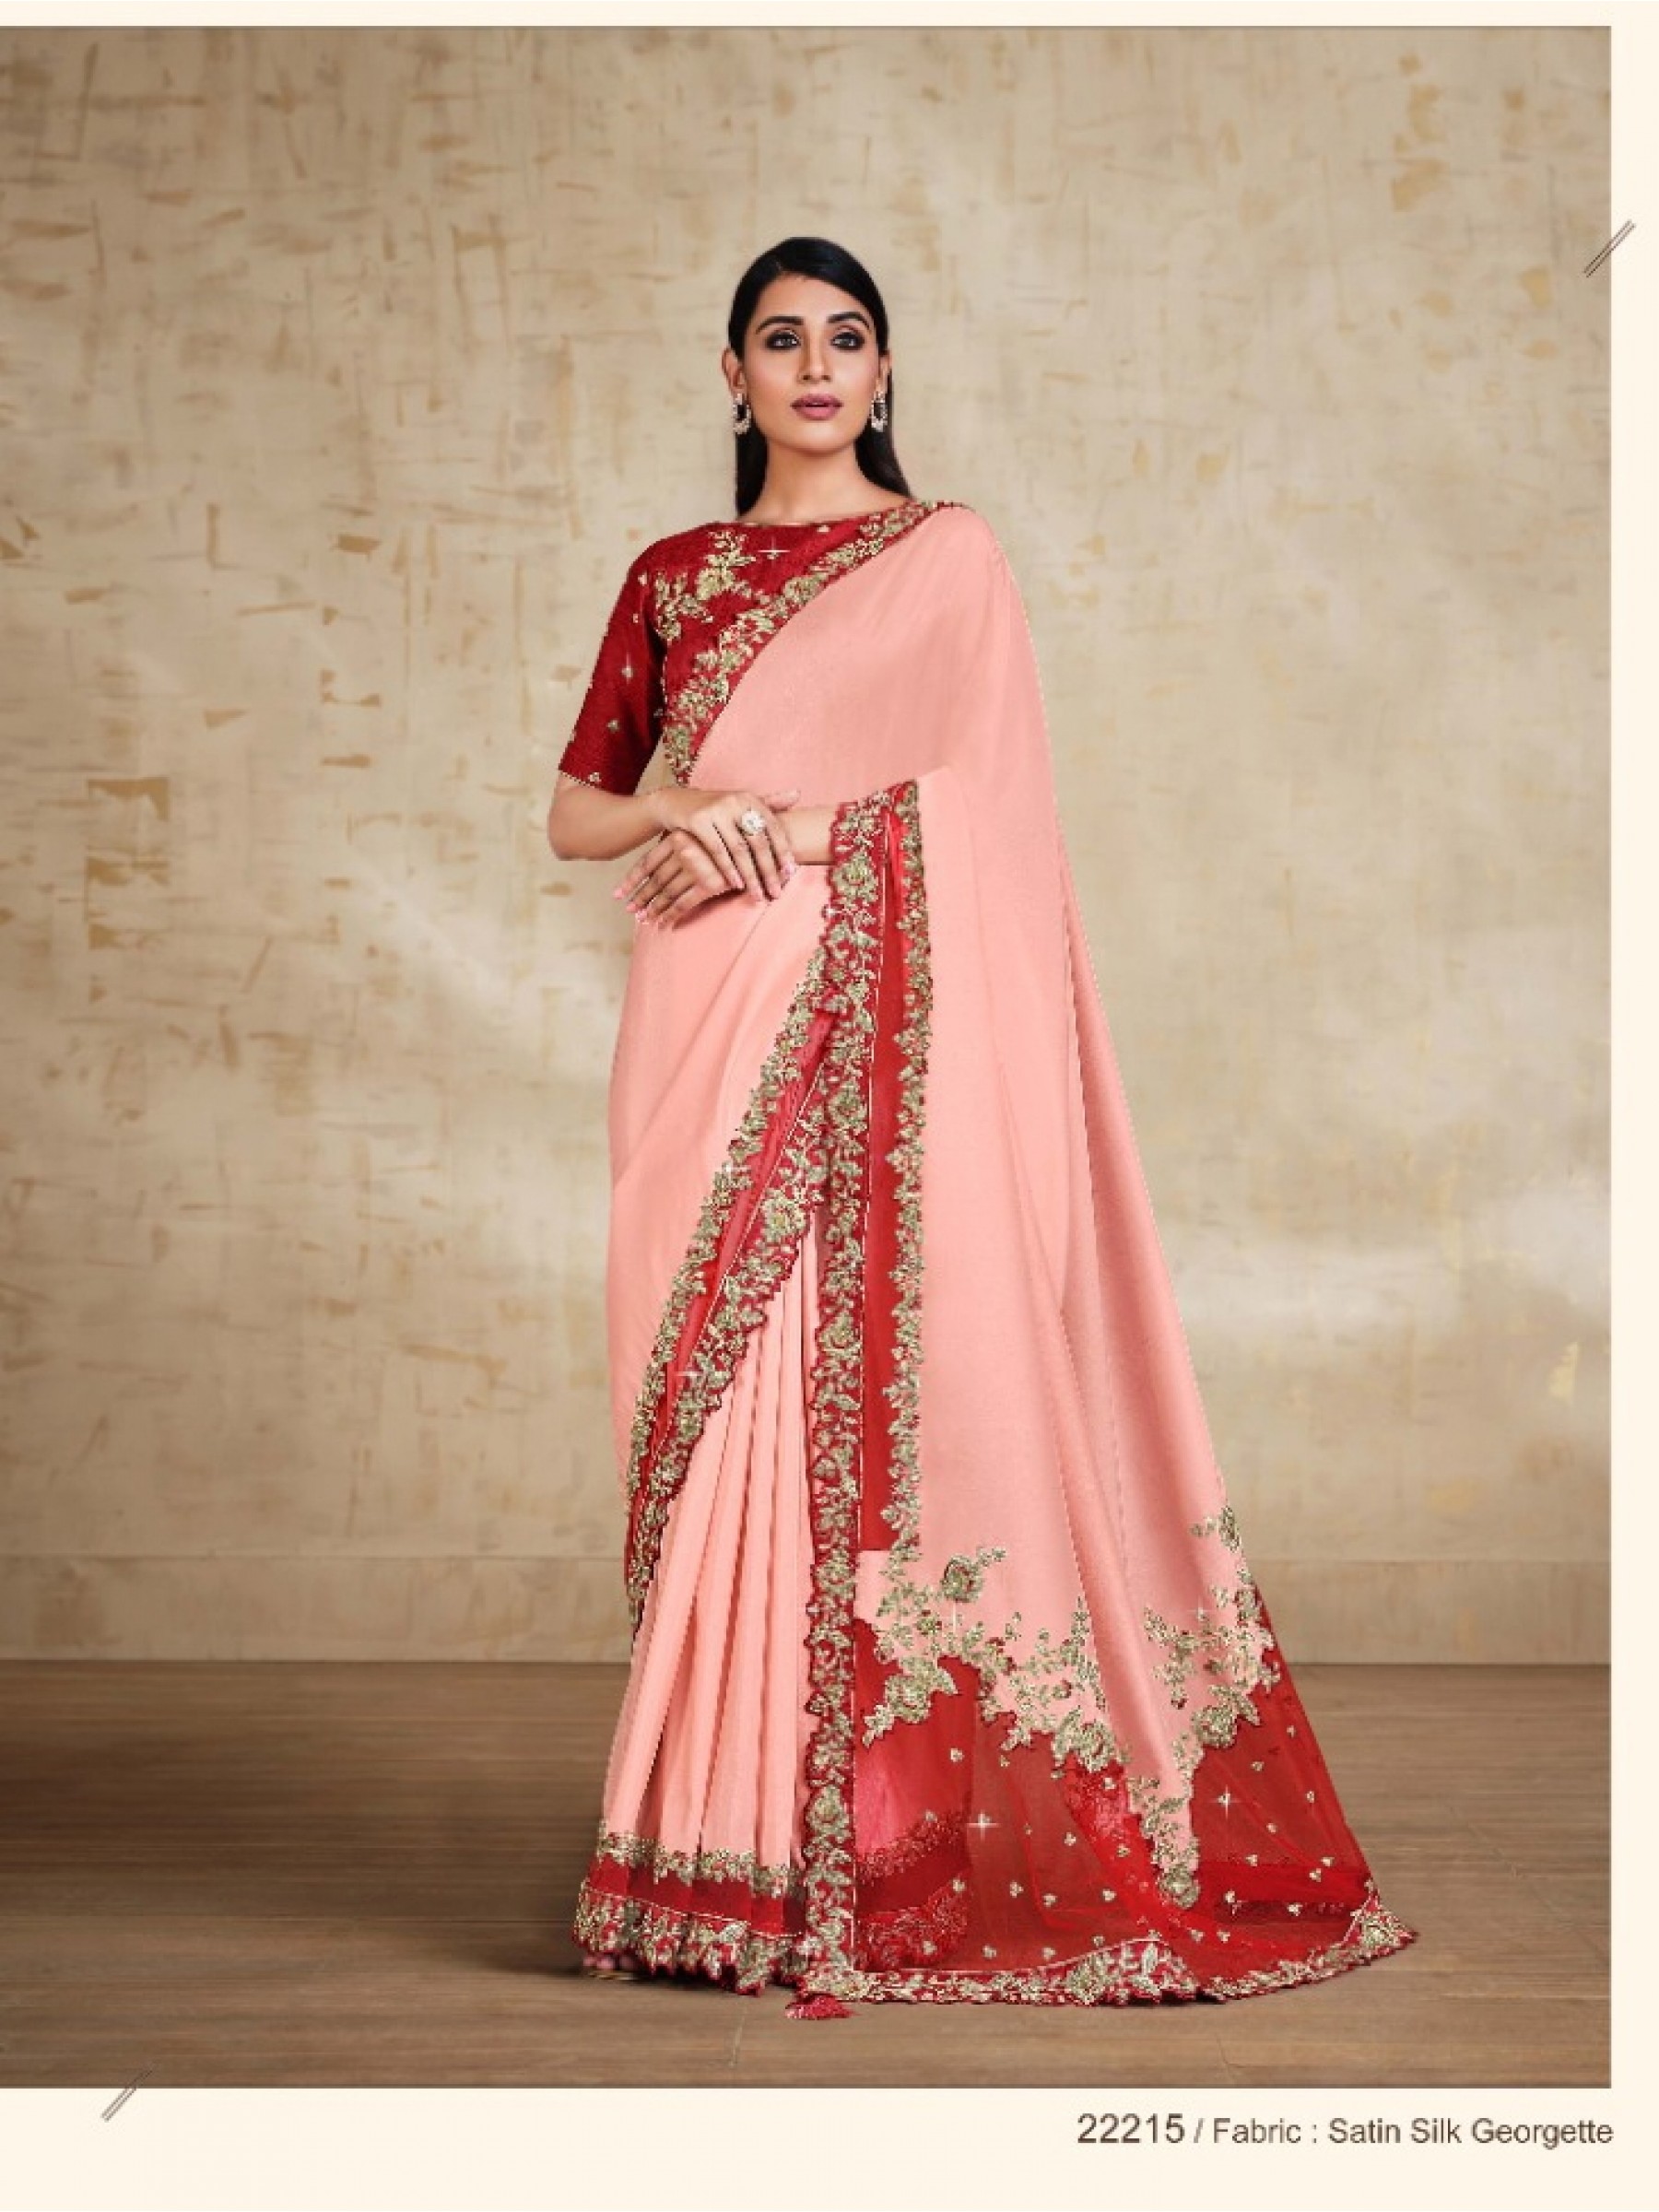 Sateen Silk Georgette  Saree In Pink Color With Embroidery Work